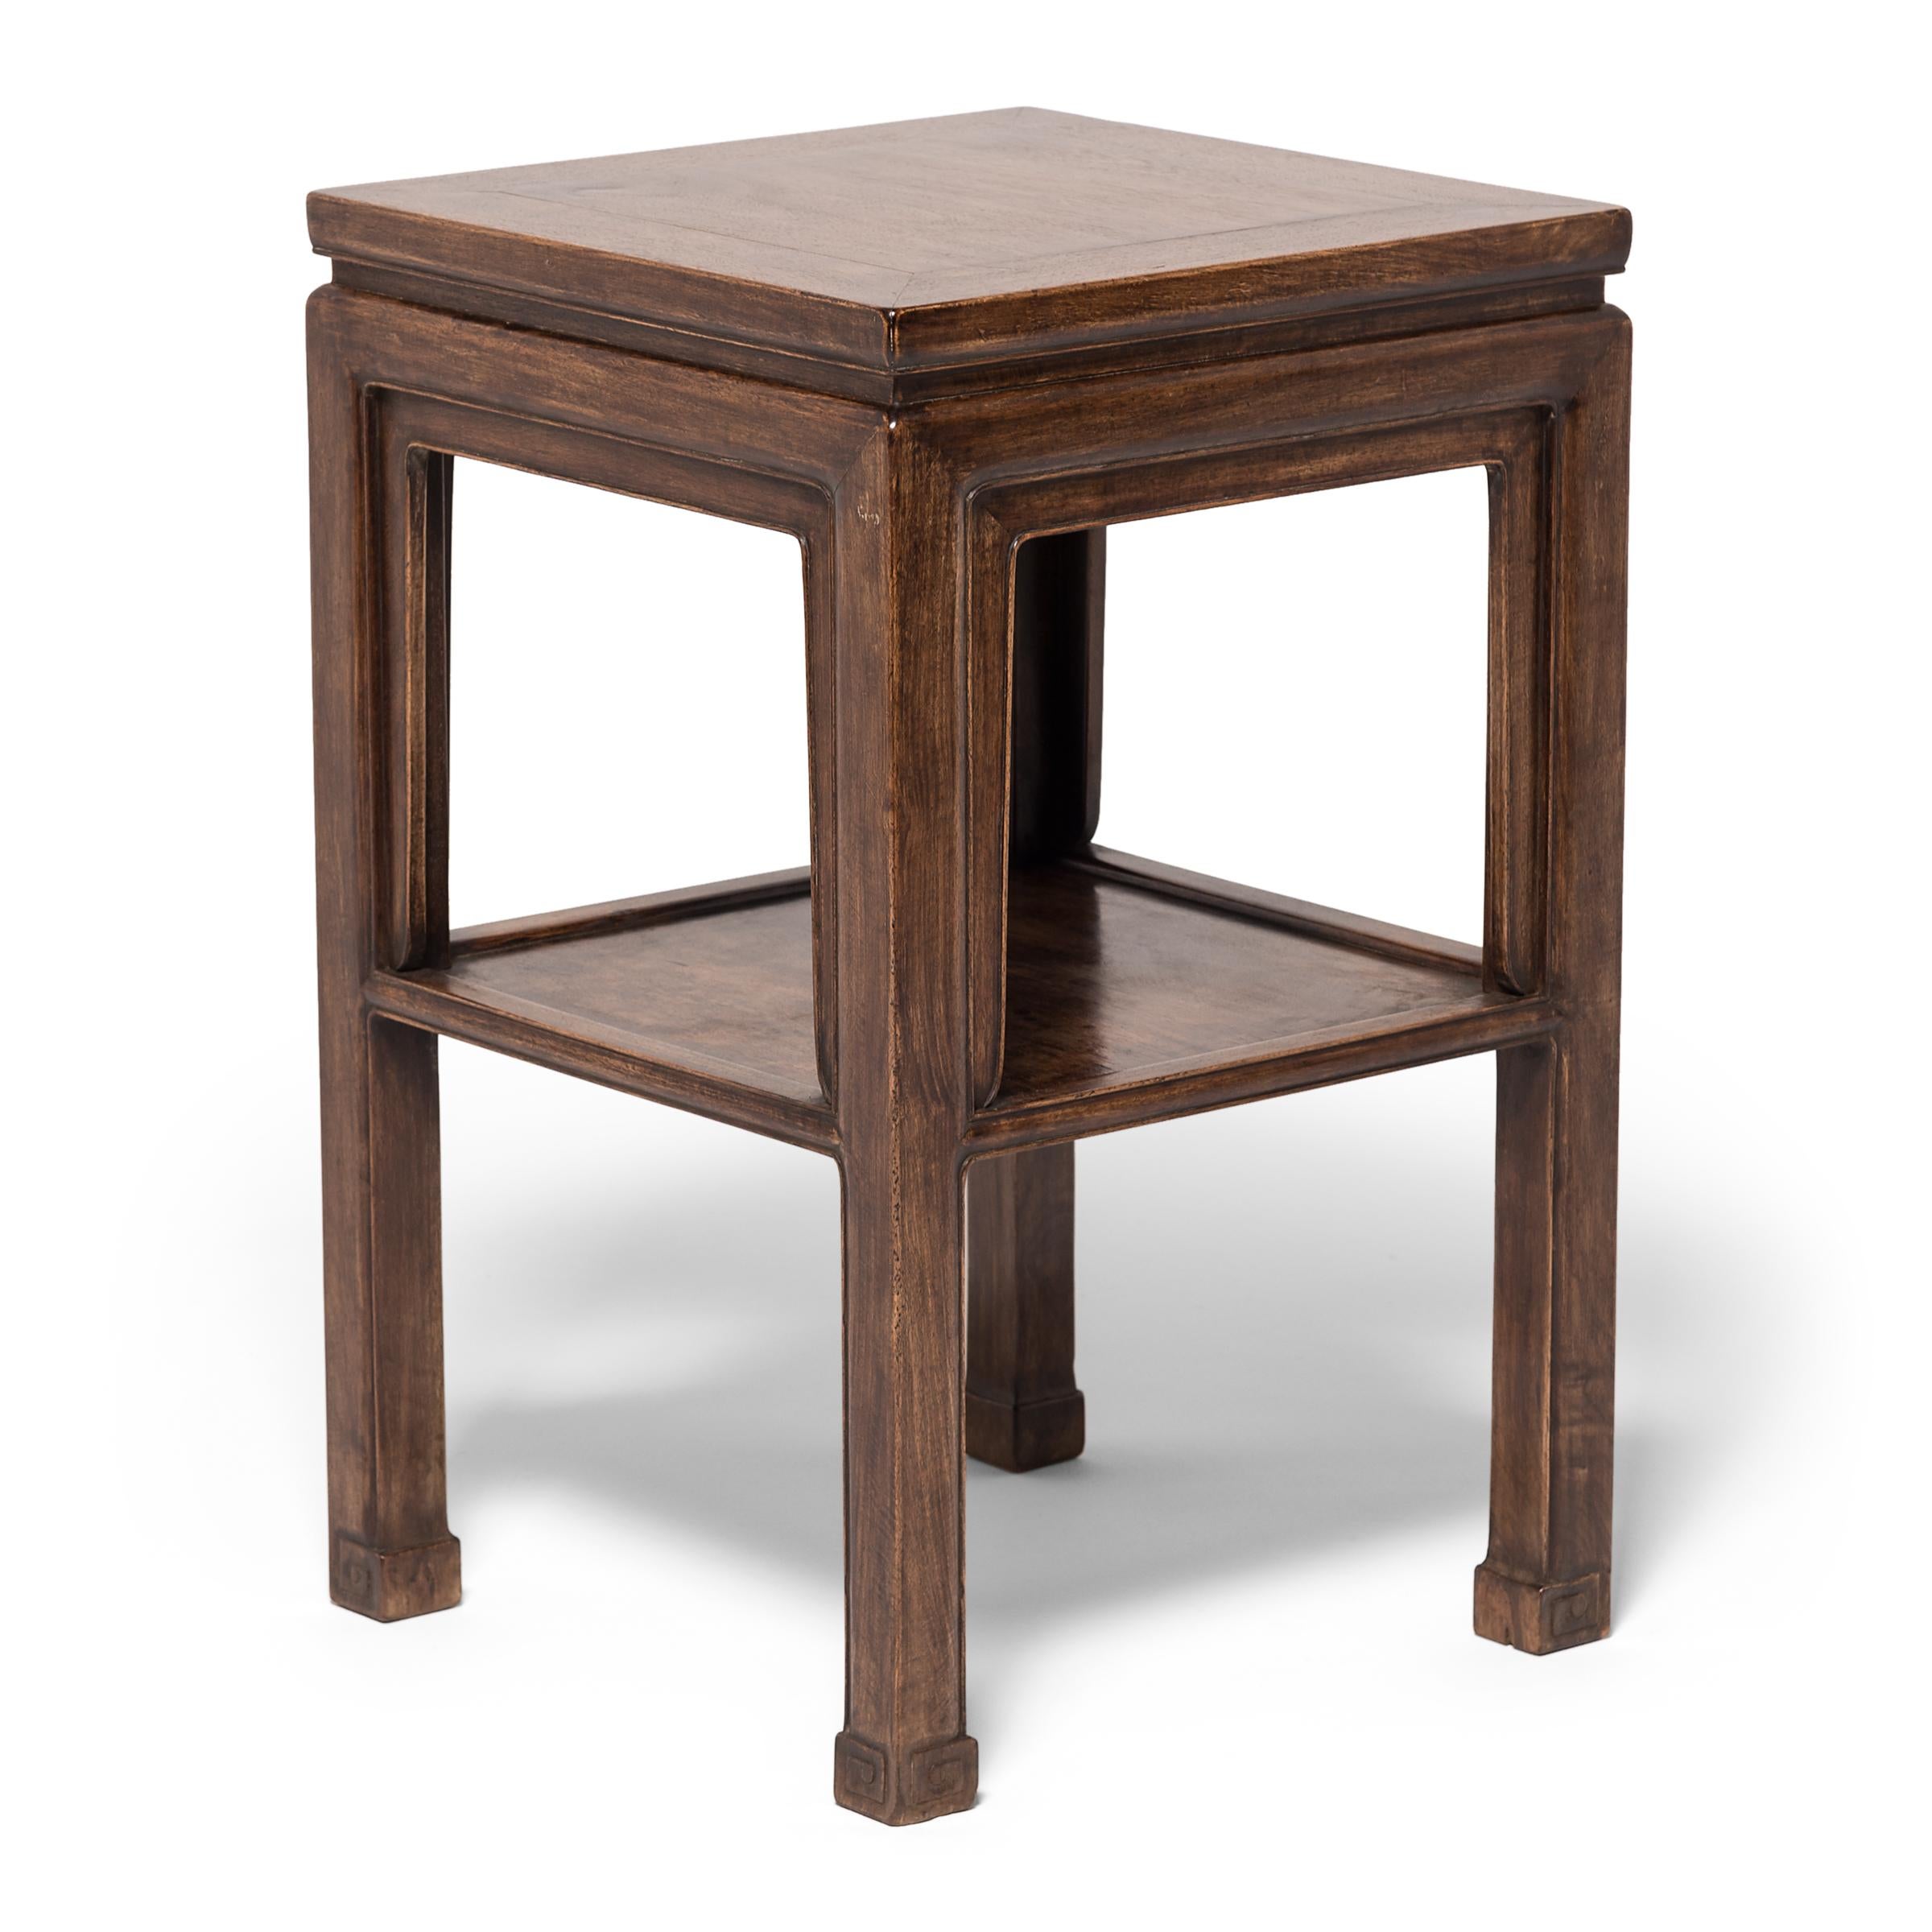 This early 20th century table is made of huali wood, a type of rosewood, and was likely used as a display stand for flowers or antiquities. Its subtle elegance is in the details: a petite waist, tailored apron, and legs ending in scroll-carved feet.